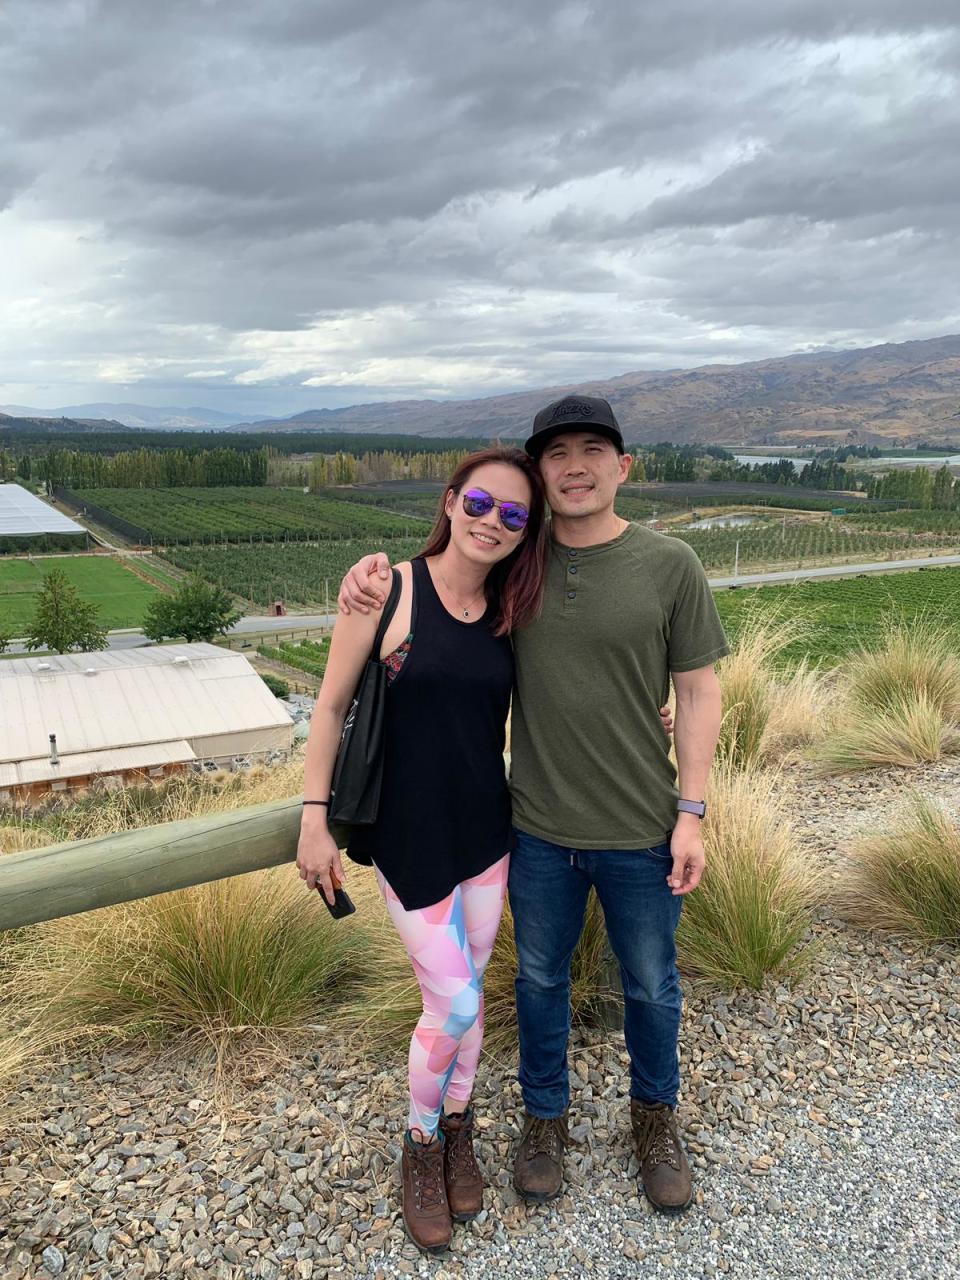 Singaporean couple Daniel Tan, 38, and Lareina Tay, 37, were on holiday in Christchurch when the deadly mosque shootings took place on Friday, 15 March 2019. PHOTO: Daniel Tan